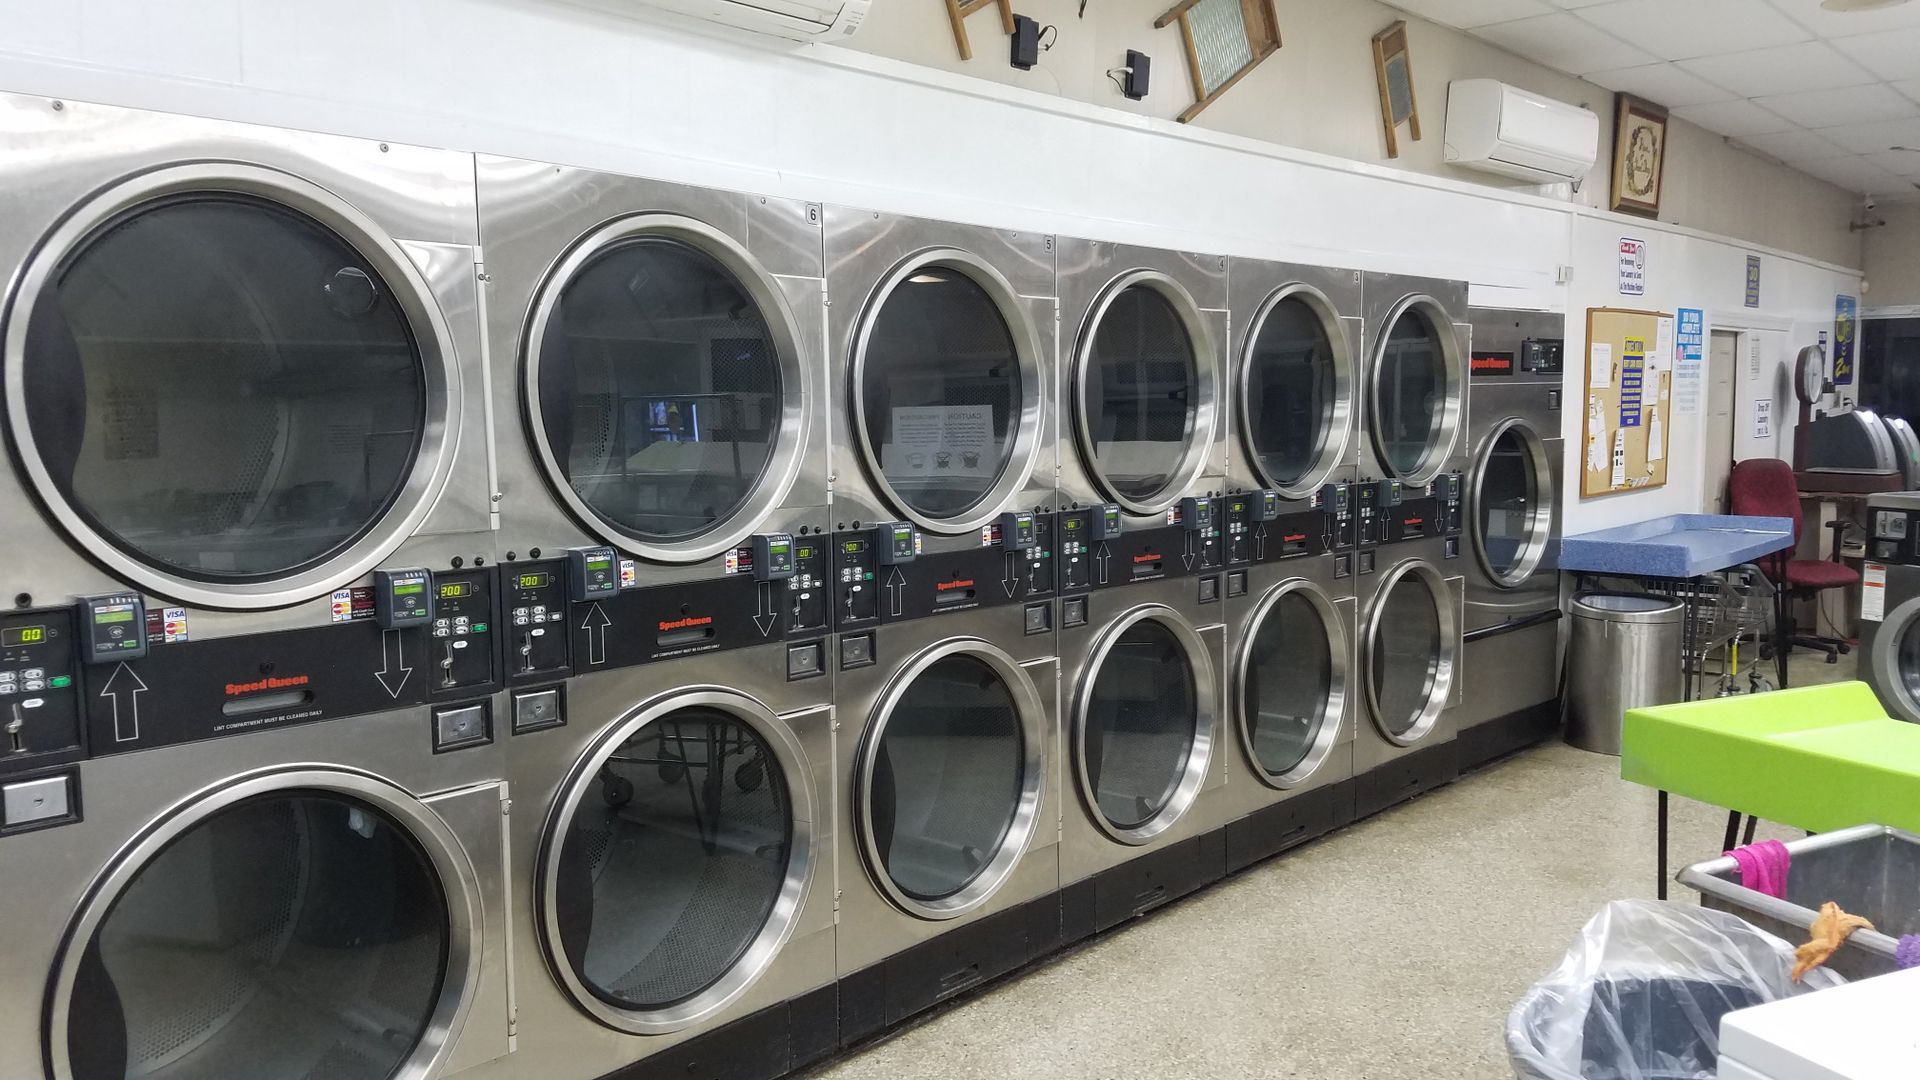 Coin operated clothes dryers